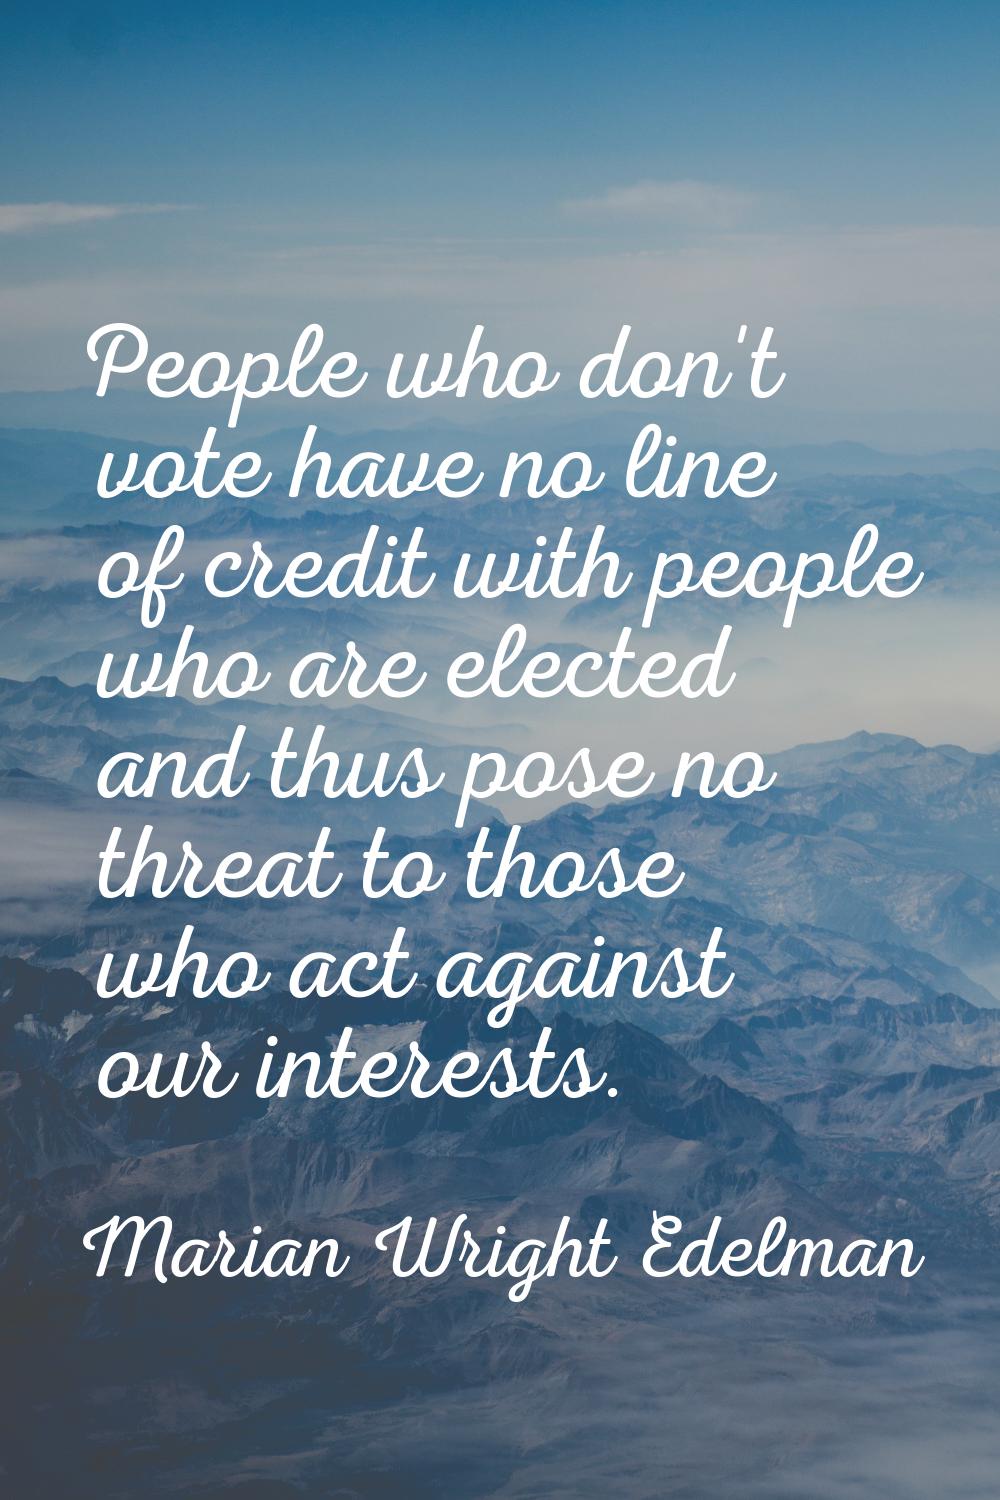 People who don't vote have no line of credit with people who are elected and thus pose no threat to